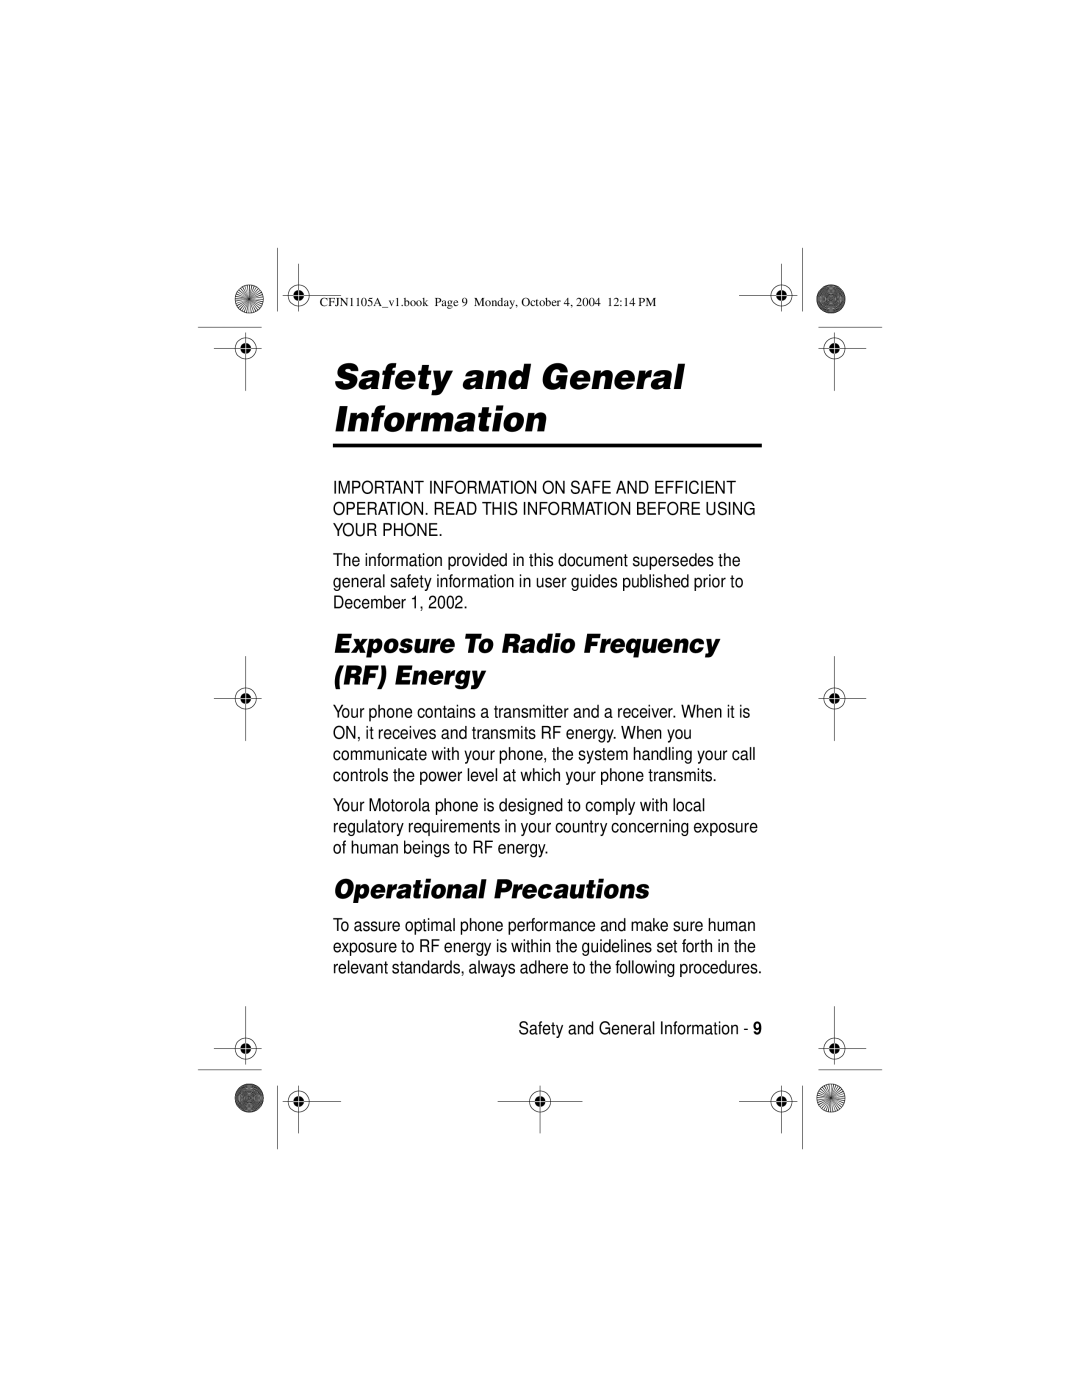 Motorola C155, C156 manual Safety and General Information, Exposure To Radio Frequency RF Energy, Operational Precautions 